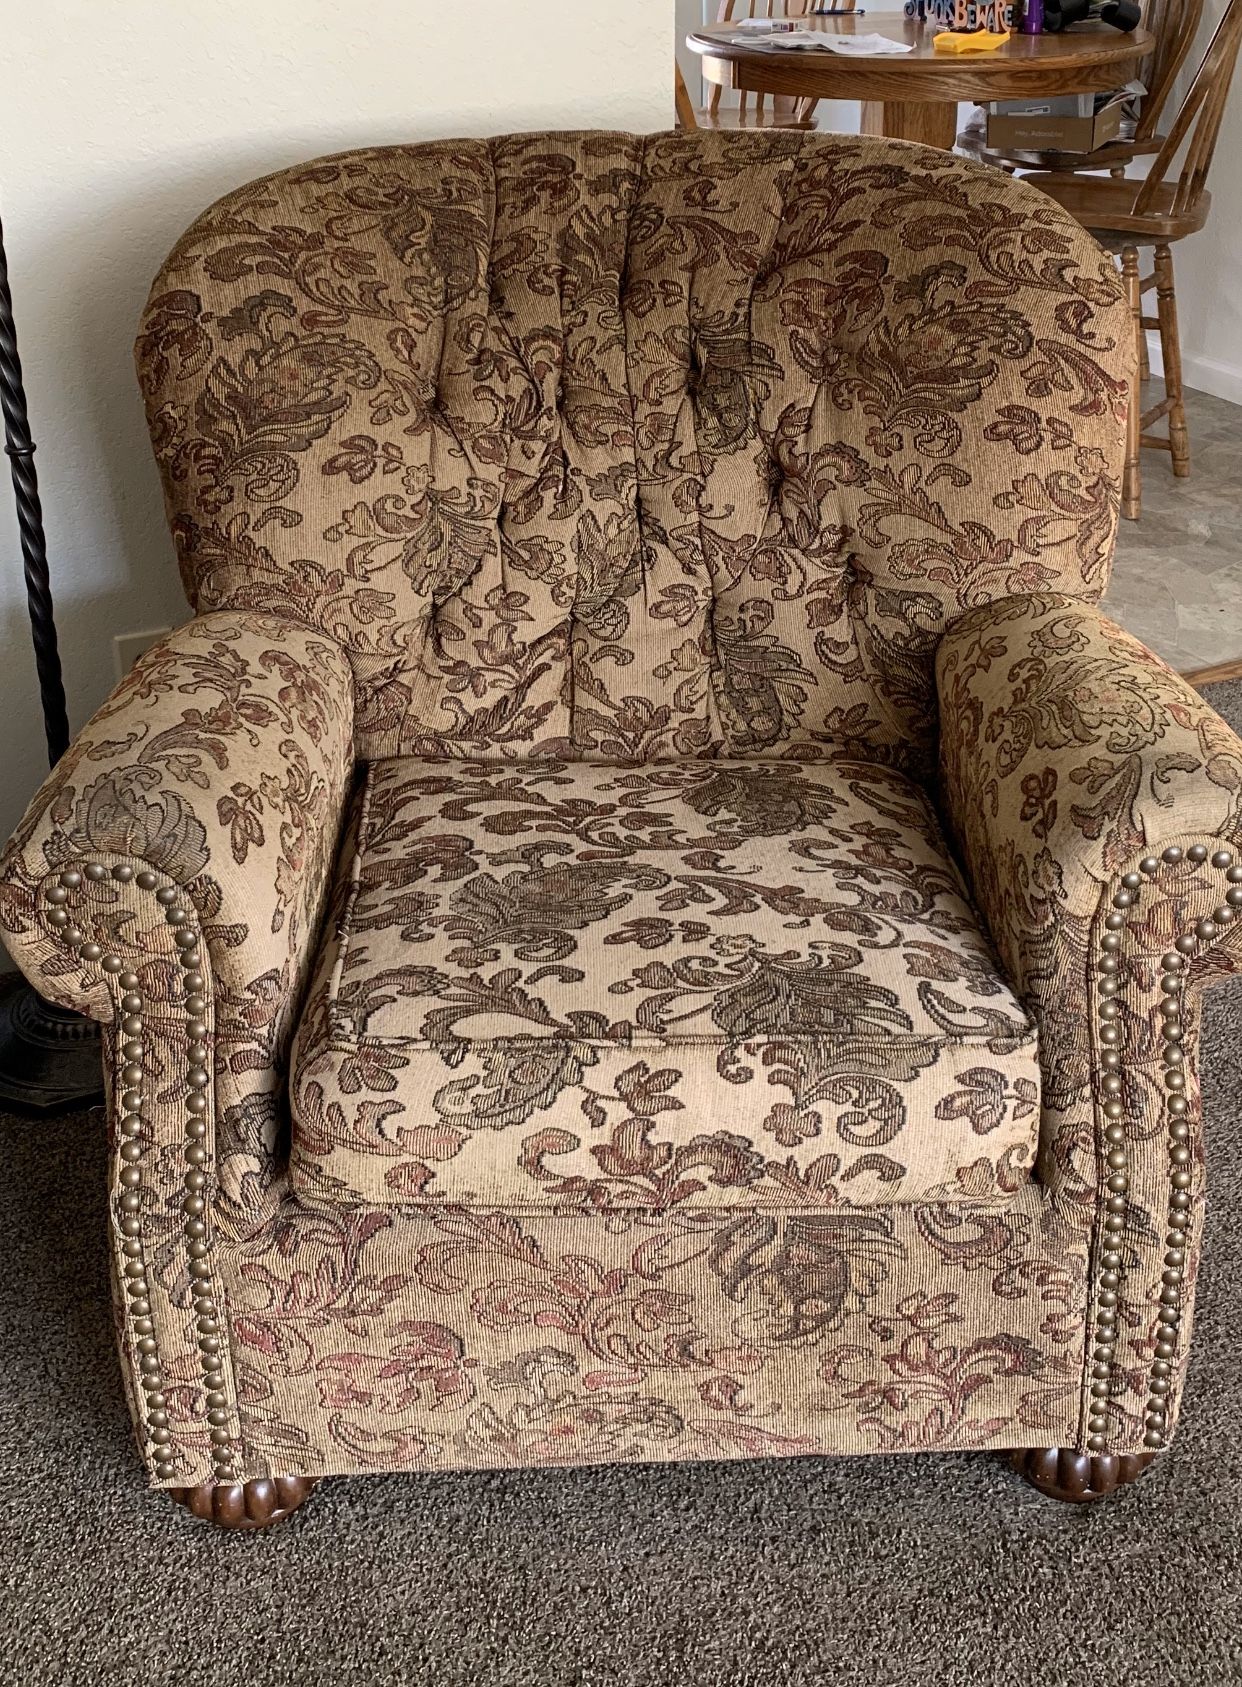 Chair and couch free good used condition